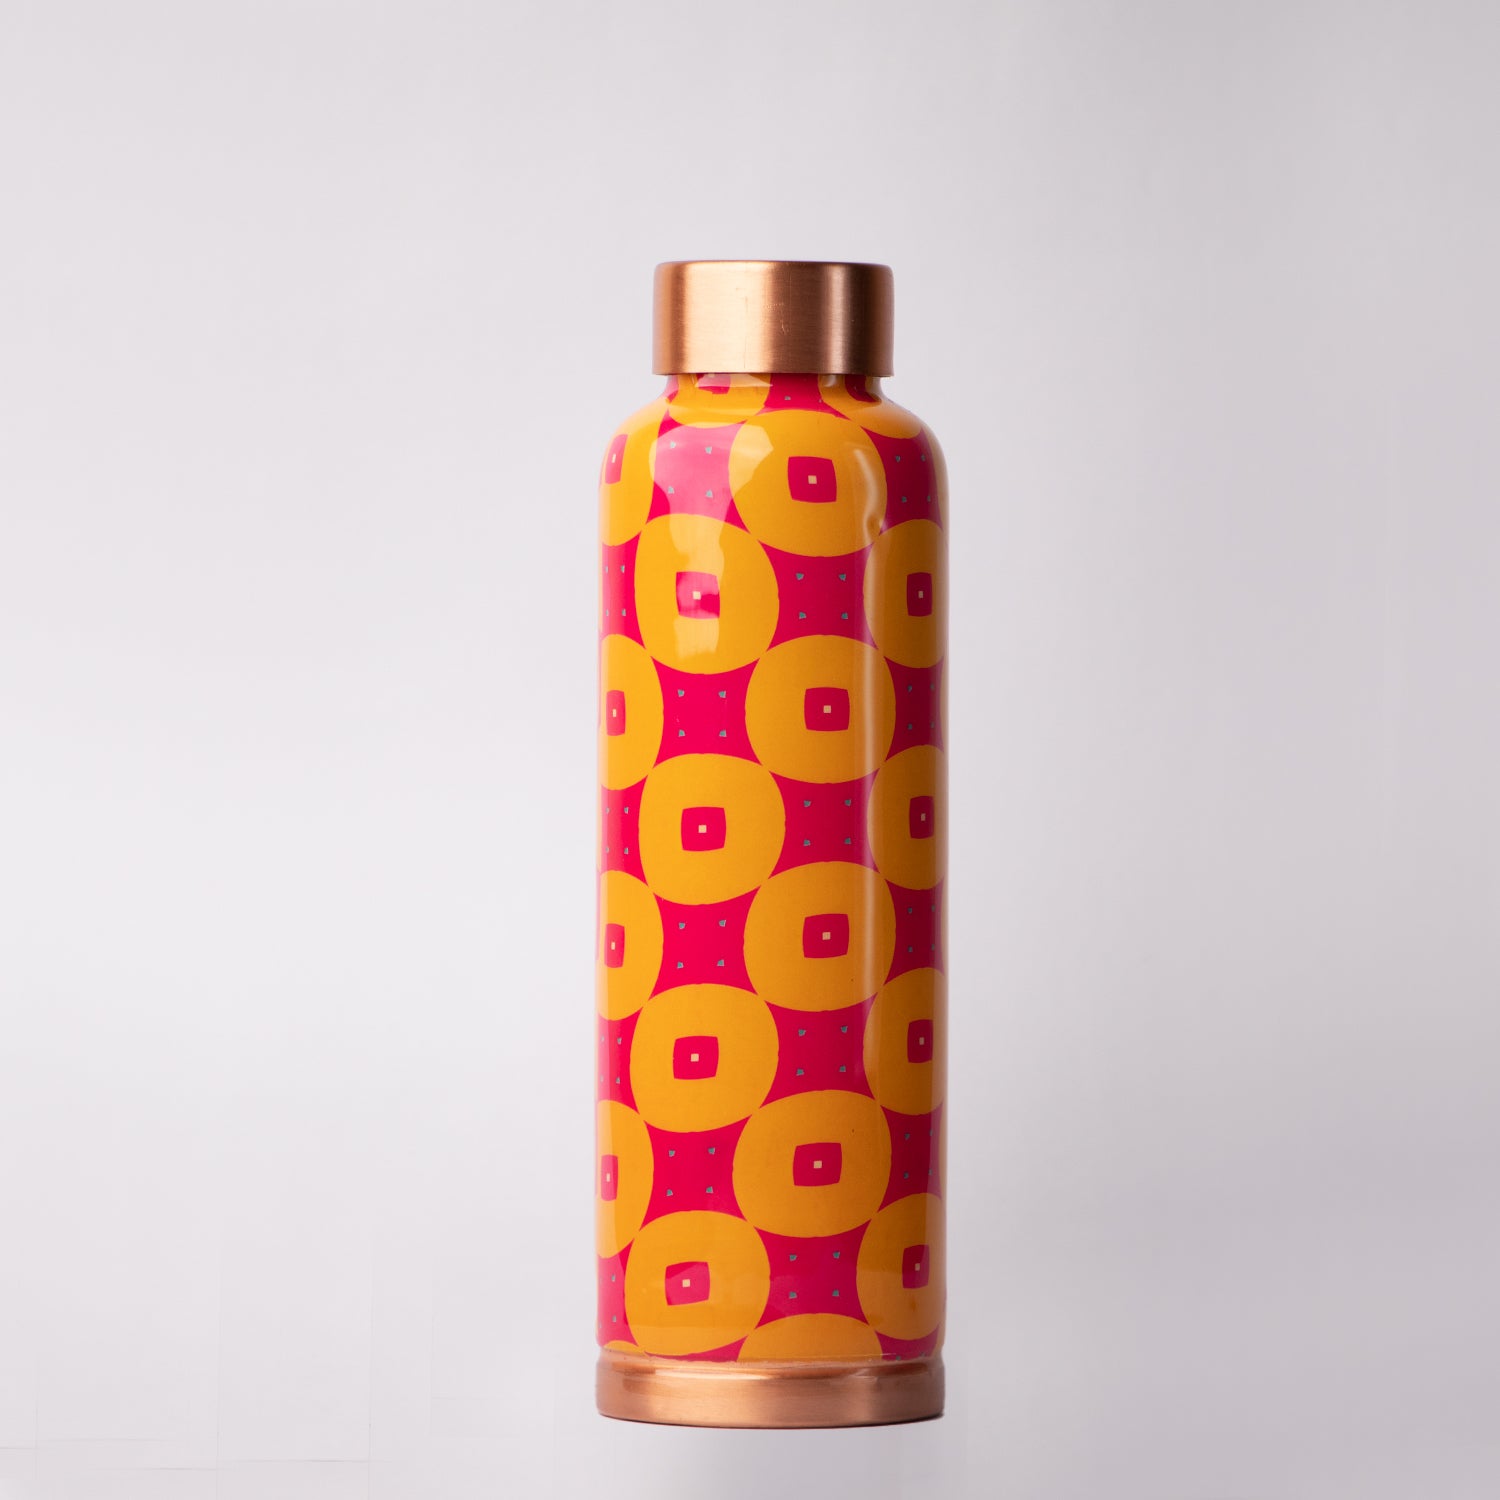 Shocking Pink Chequer| 100% Pure Copper Bottle|950 ml | Peacoy